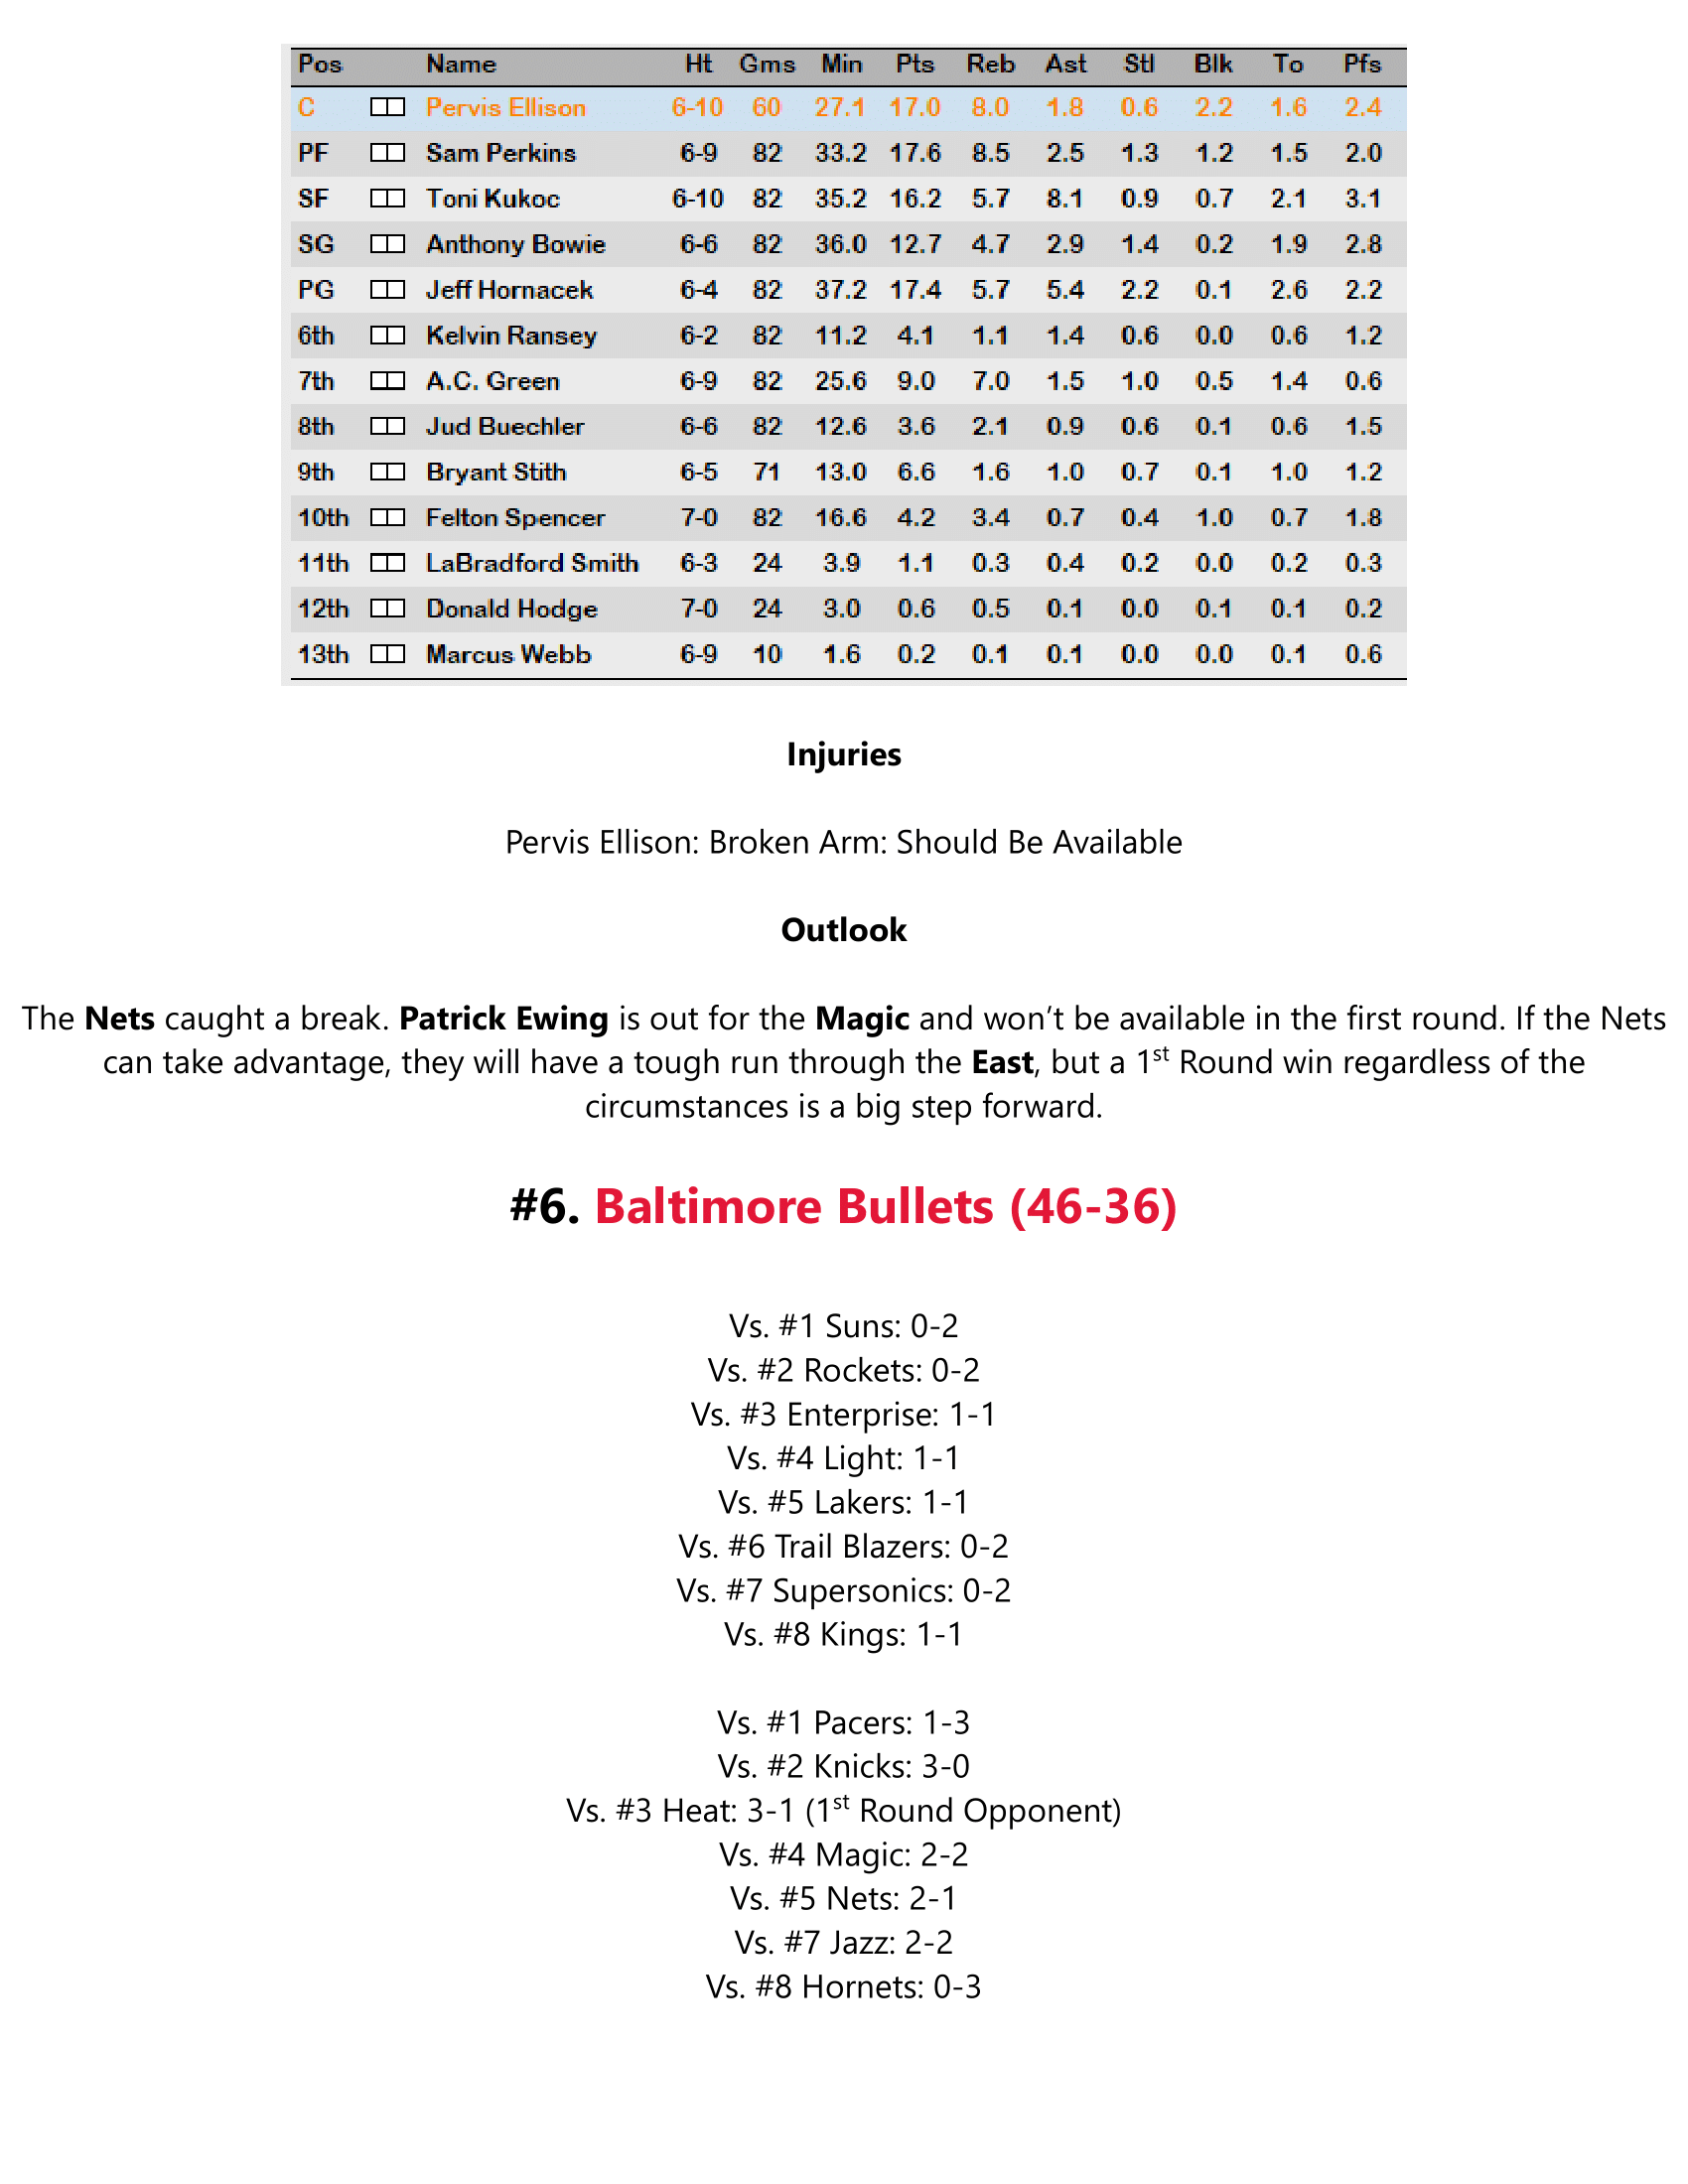 92-93-Part-4-Playoff-Preview-21.png